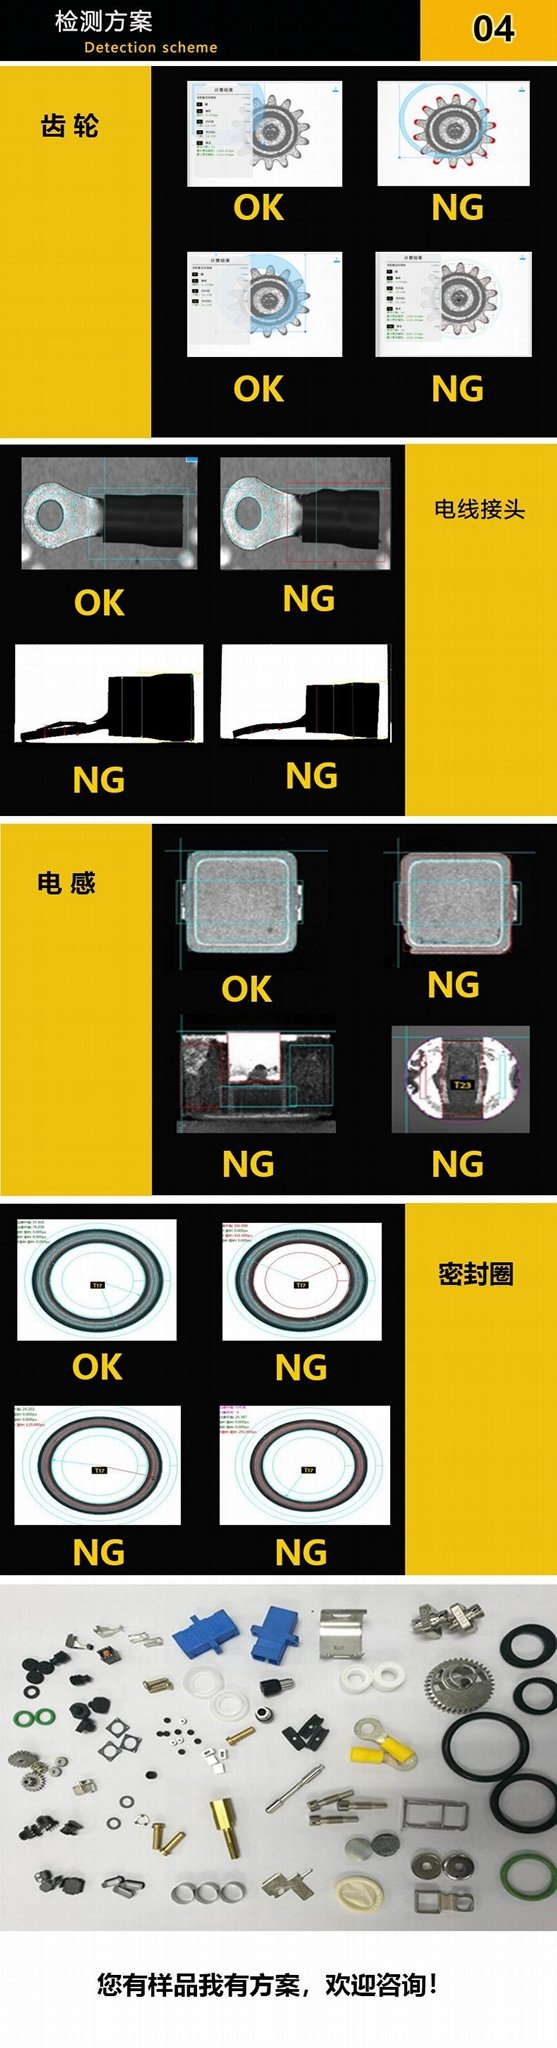 Cloud Disk High Speed Inspection Equipment for Appearance – Standard Machine 3